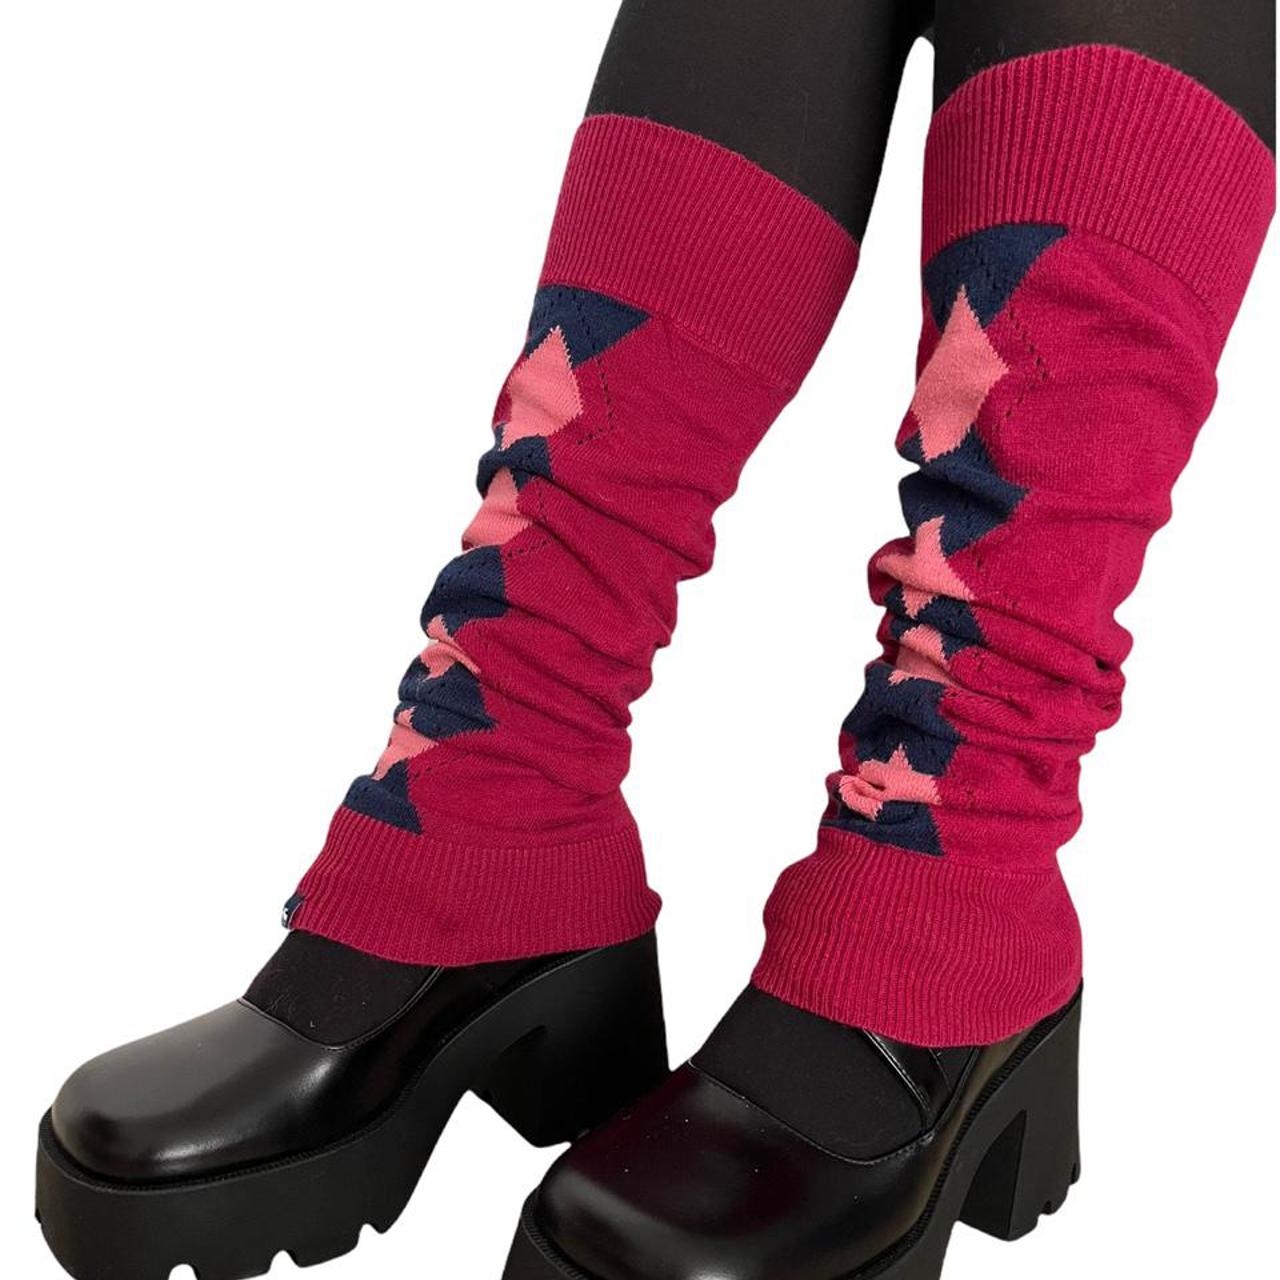 Product Image 1 - Abercrombie and Fitch leg warmers
Dark